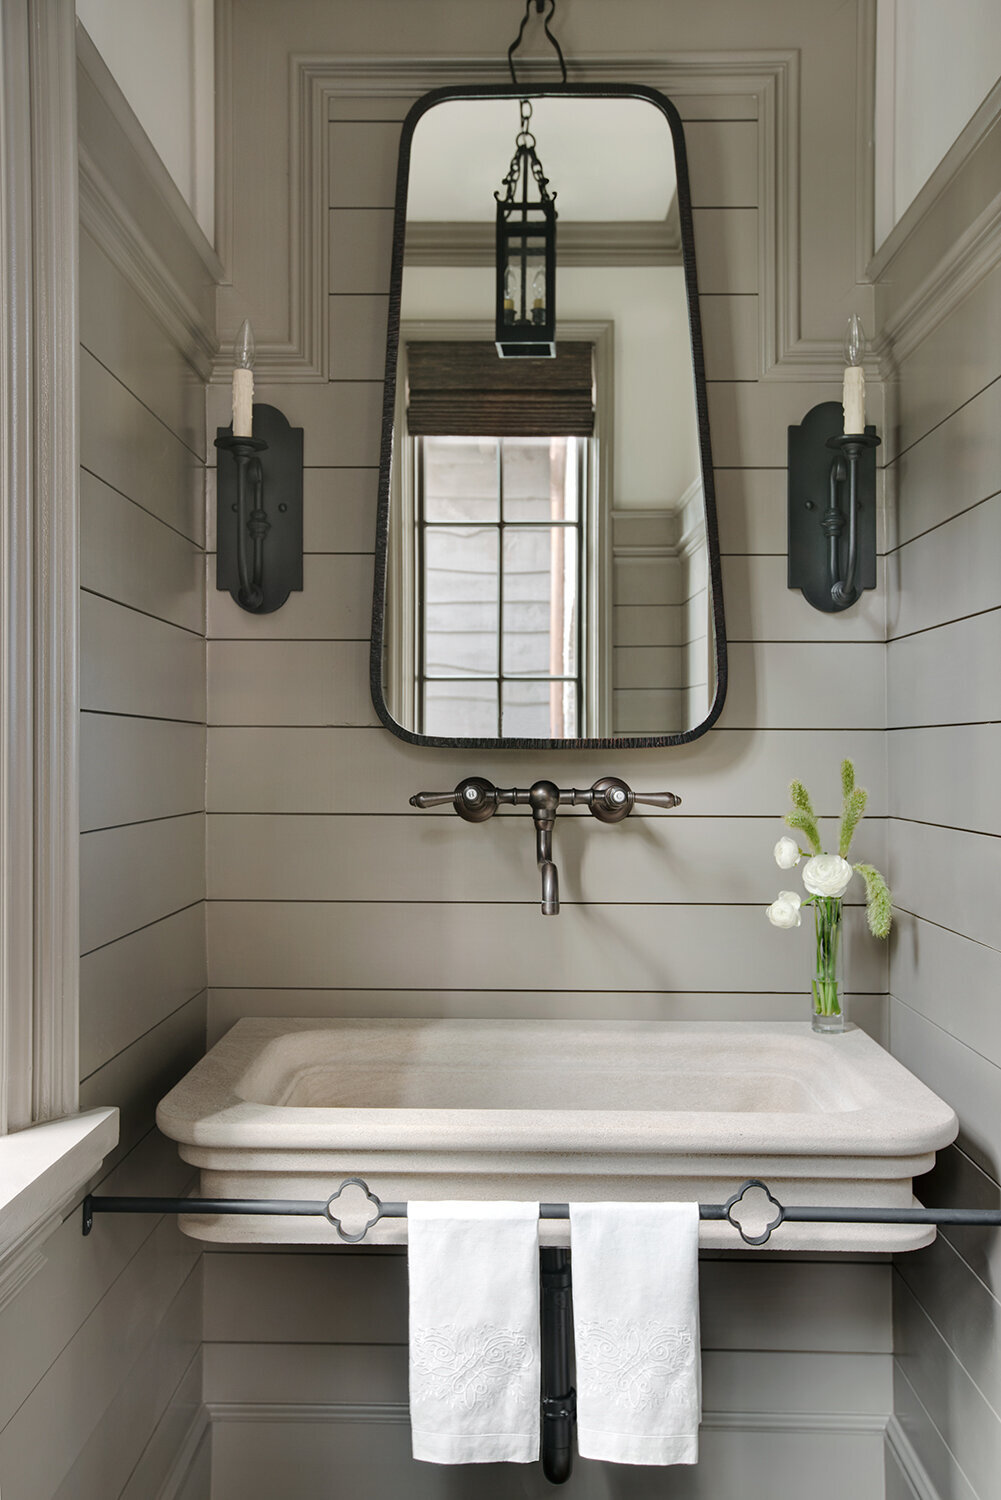 Panageries Residential Interior Design | Traditional Mountain Roost Powder Bath with Mirror and Flowers Mountain Roost | Greenville South Carolina Interior Design by Panageries